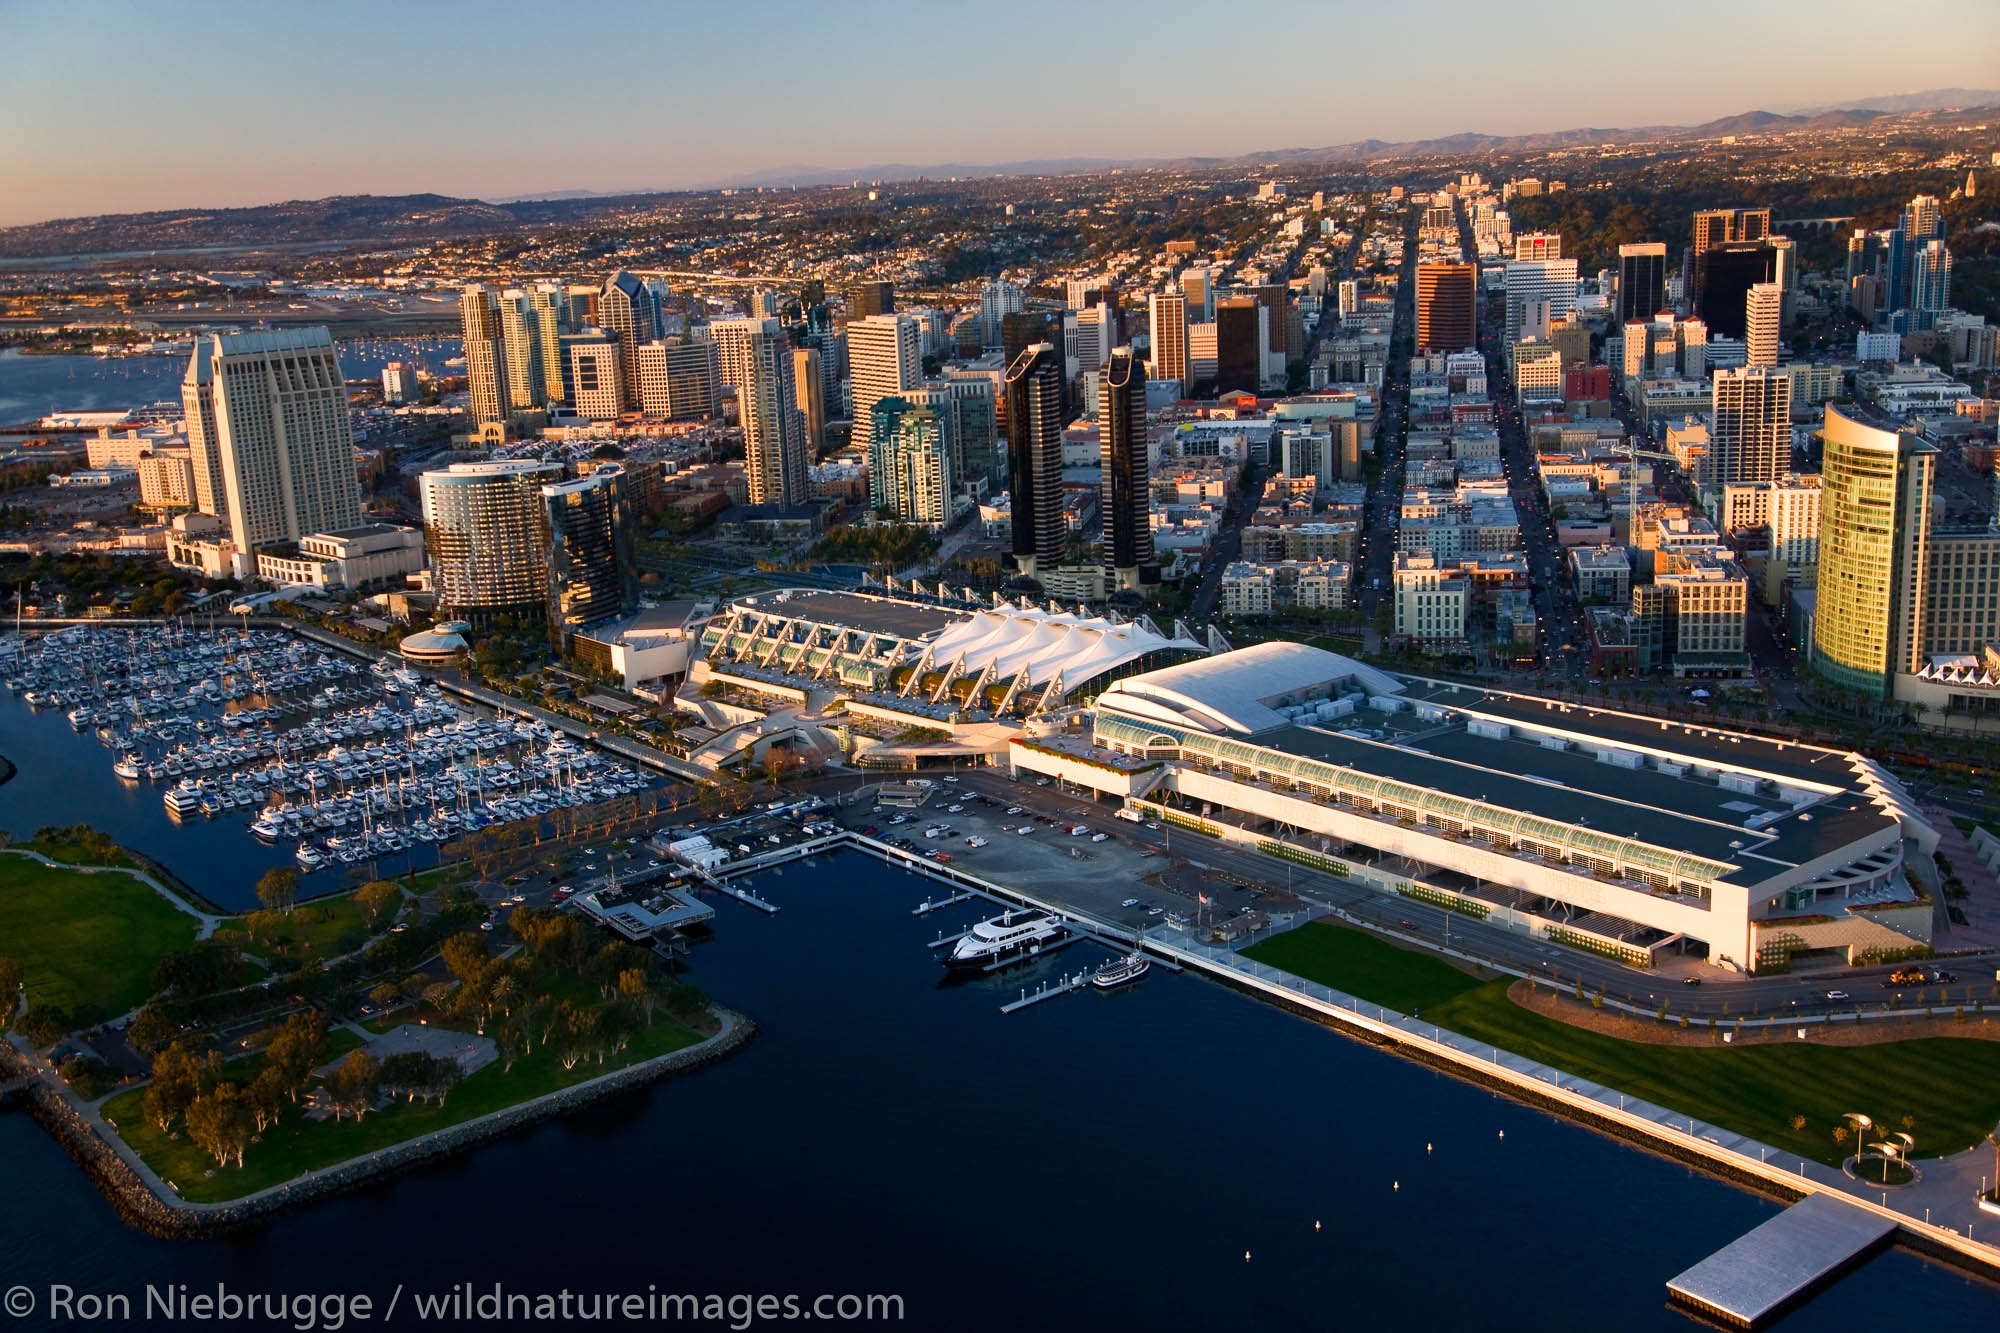 San Diego Convention Center, Seaport Village and the Embarcadero Marina Park, downtown San Diego, California.